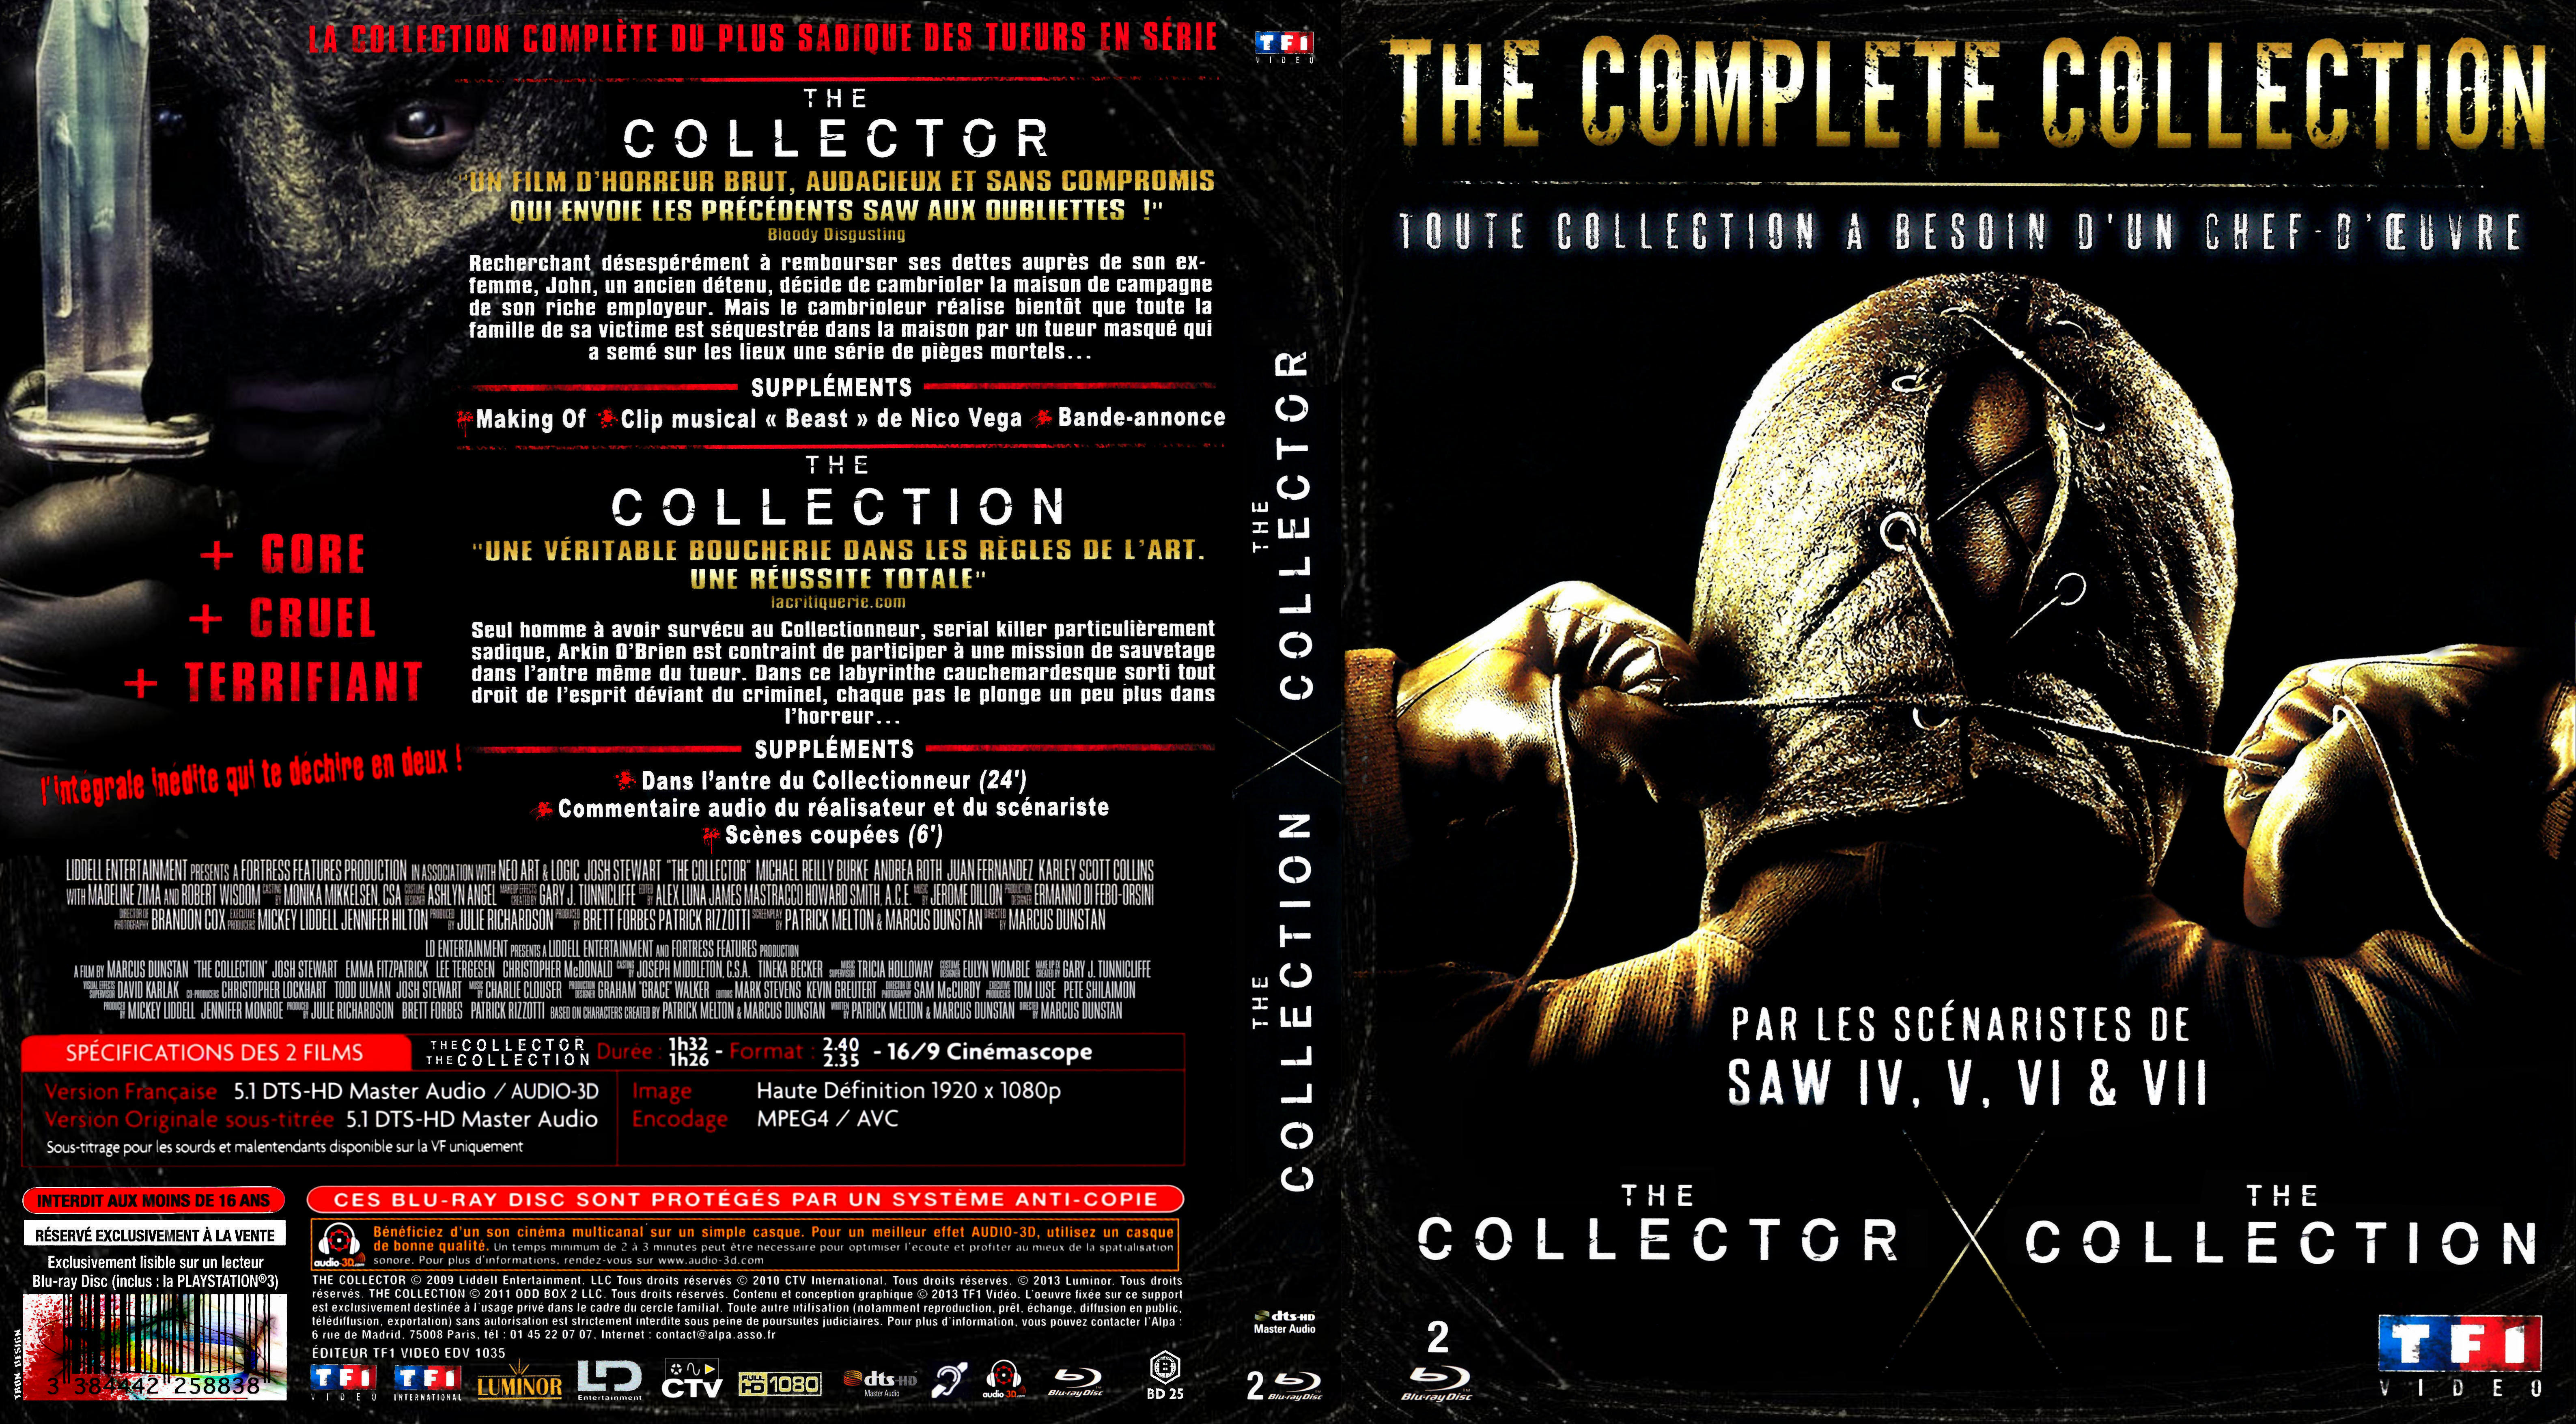 Jaquette DVD The  collector & The collection custom (BLU-RAY)